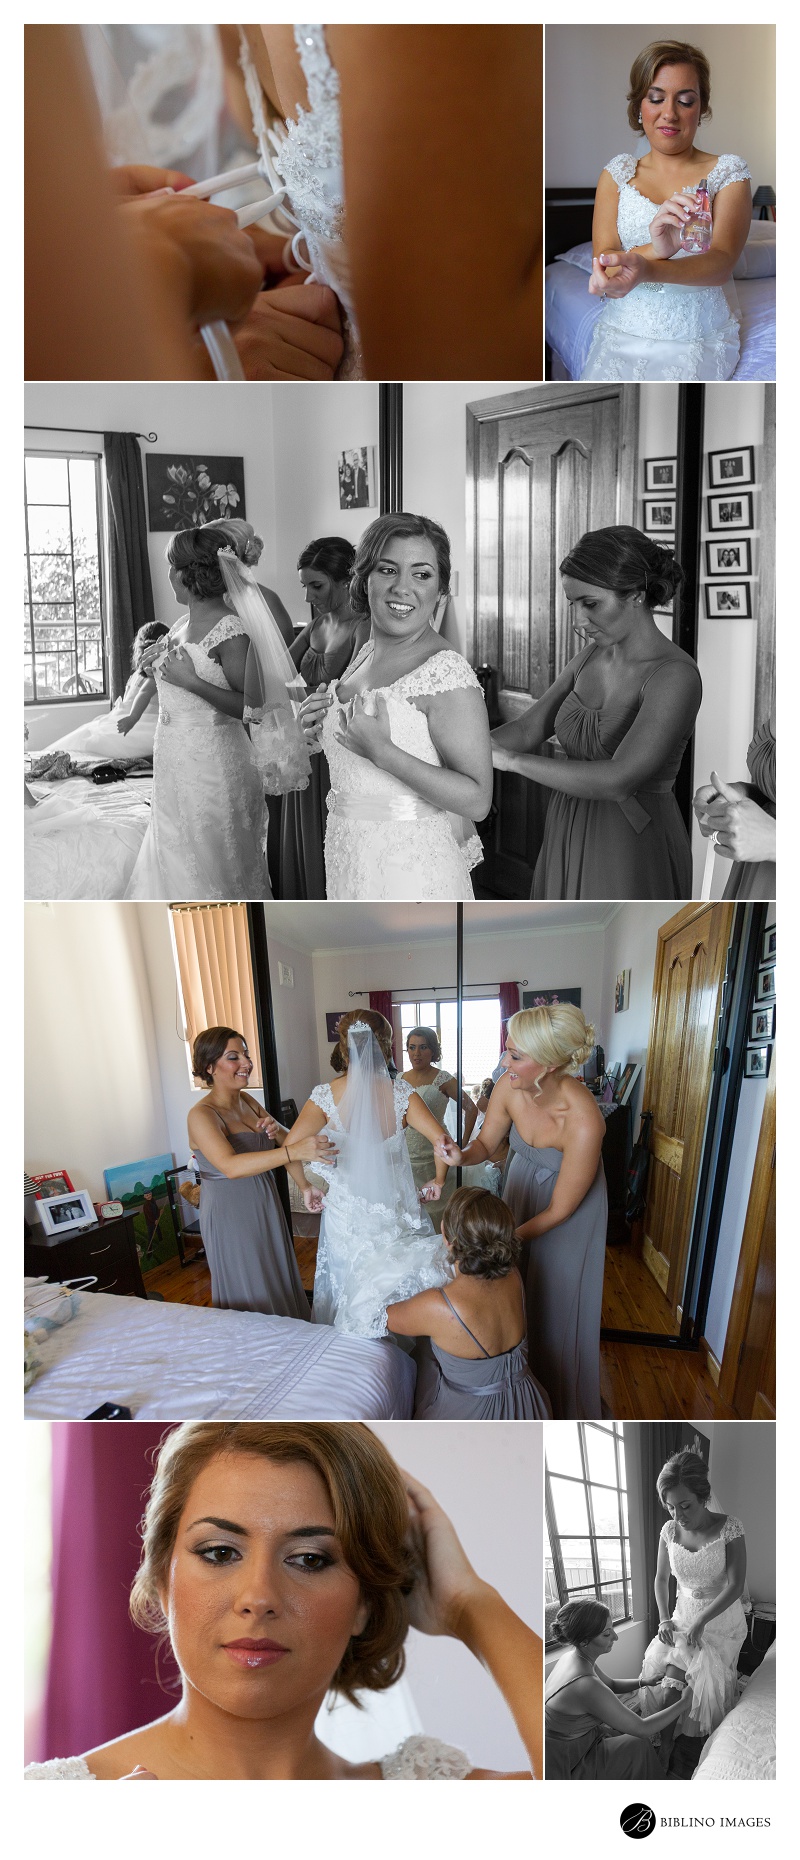 Bride-and-bridemaids-getting-ready-at-the-house